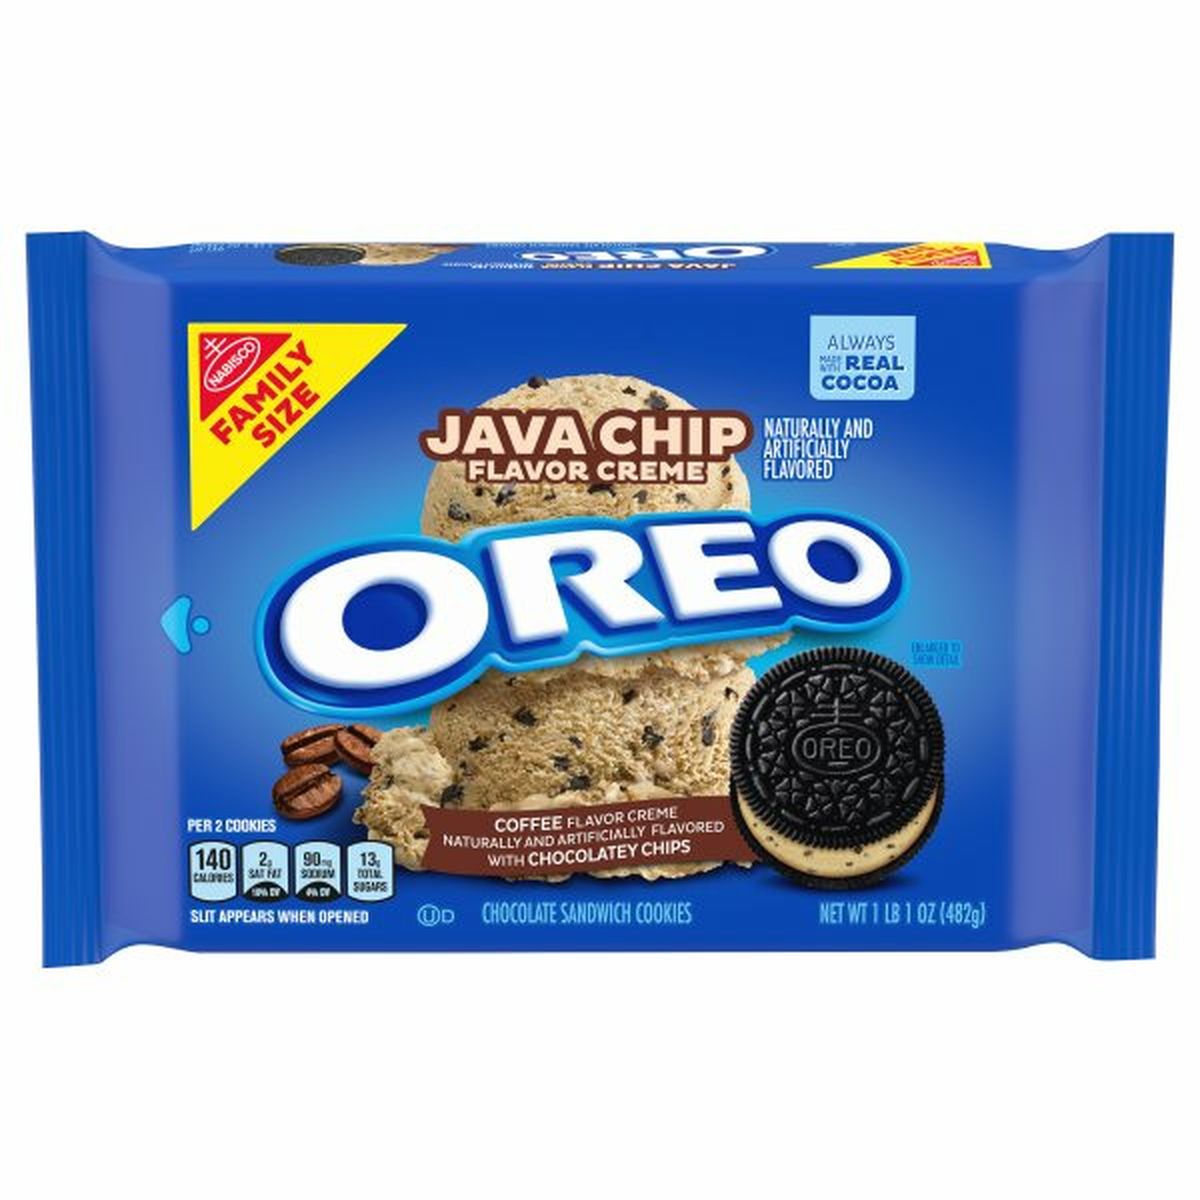 Calories in Oreo Chocolate Sandwich Cookies, Java Chip Flavor Creme, Family Size